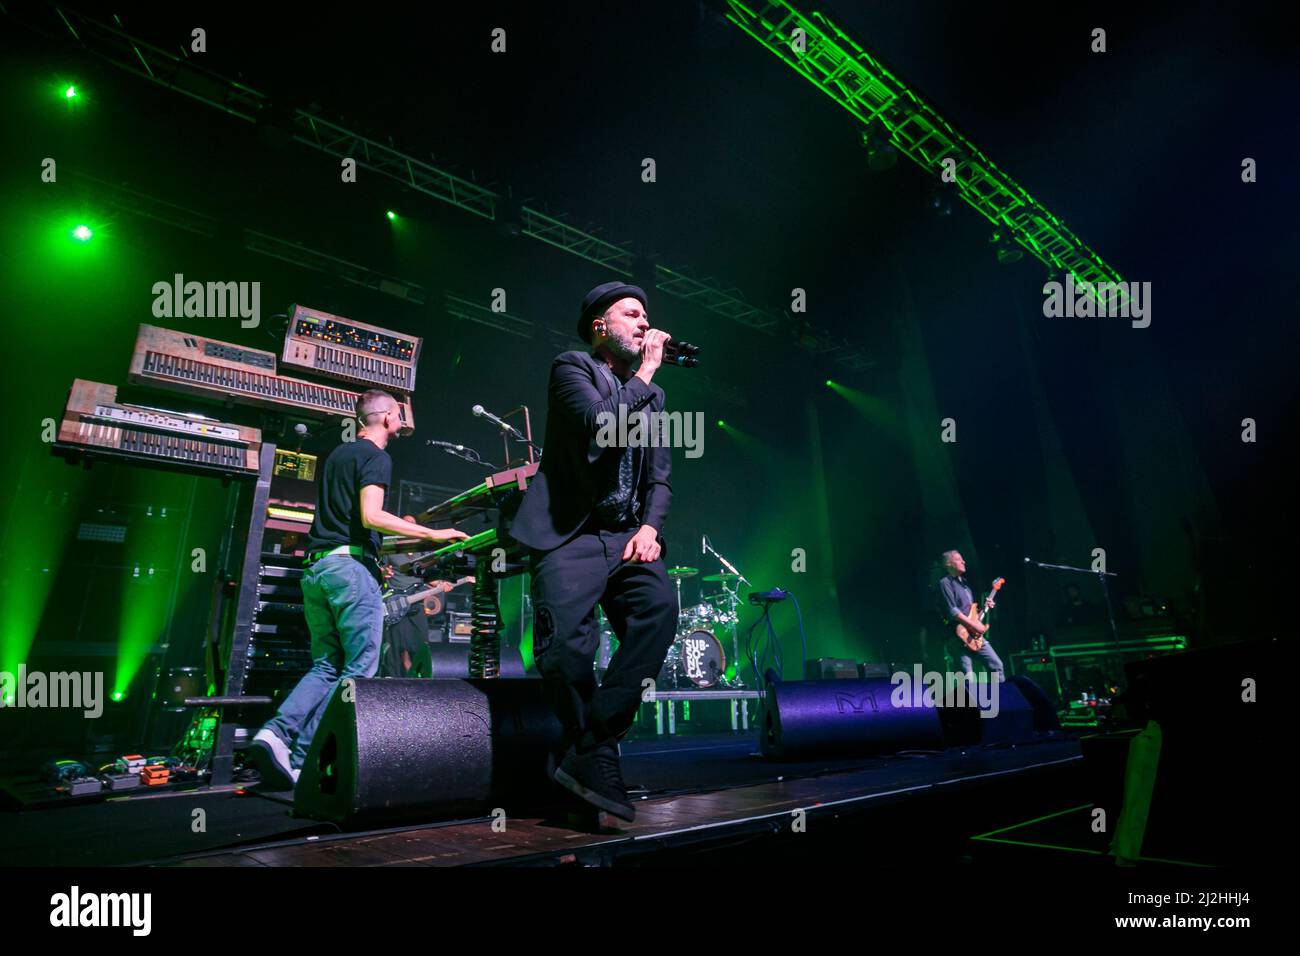 the Italian band Subsonica perform live the first concert of the tour Microchip temporale tour in Turin after the covid restrictions Stock Photo